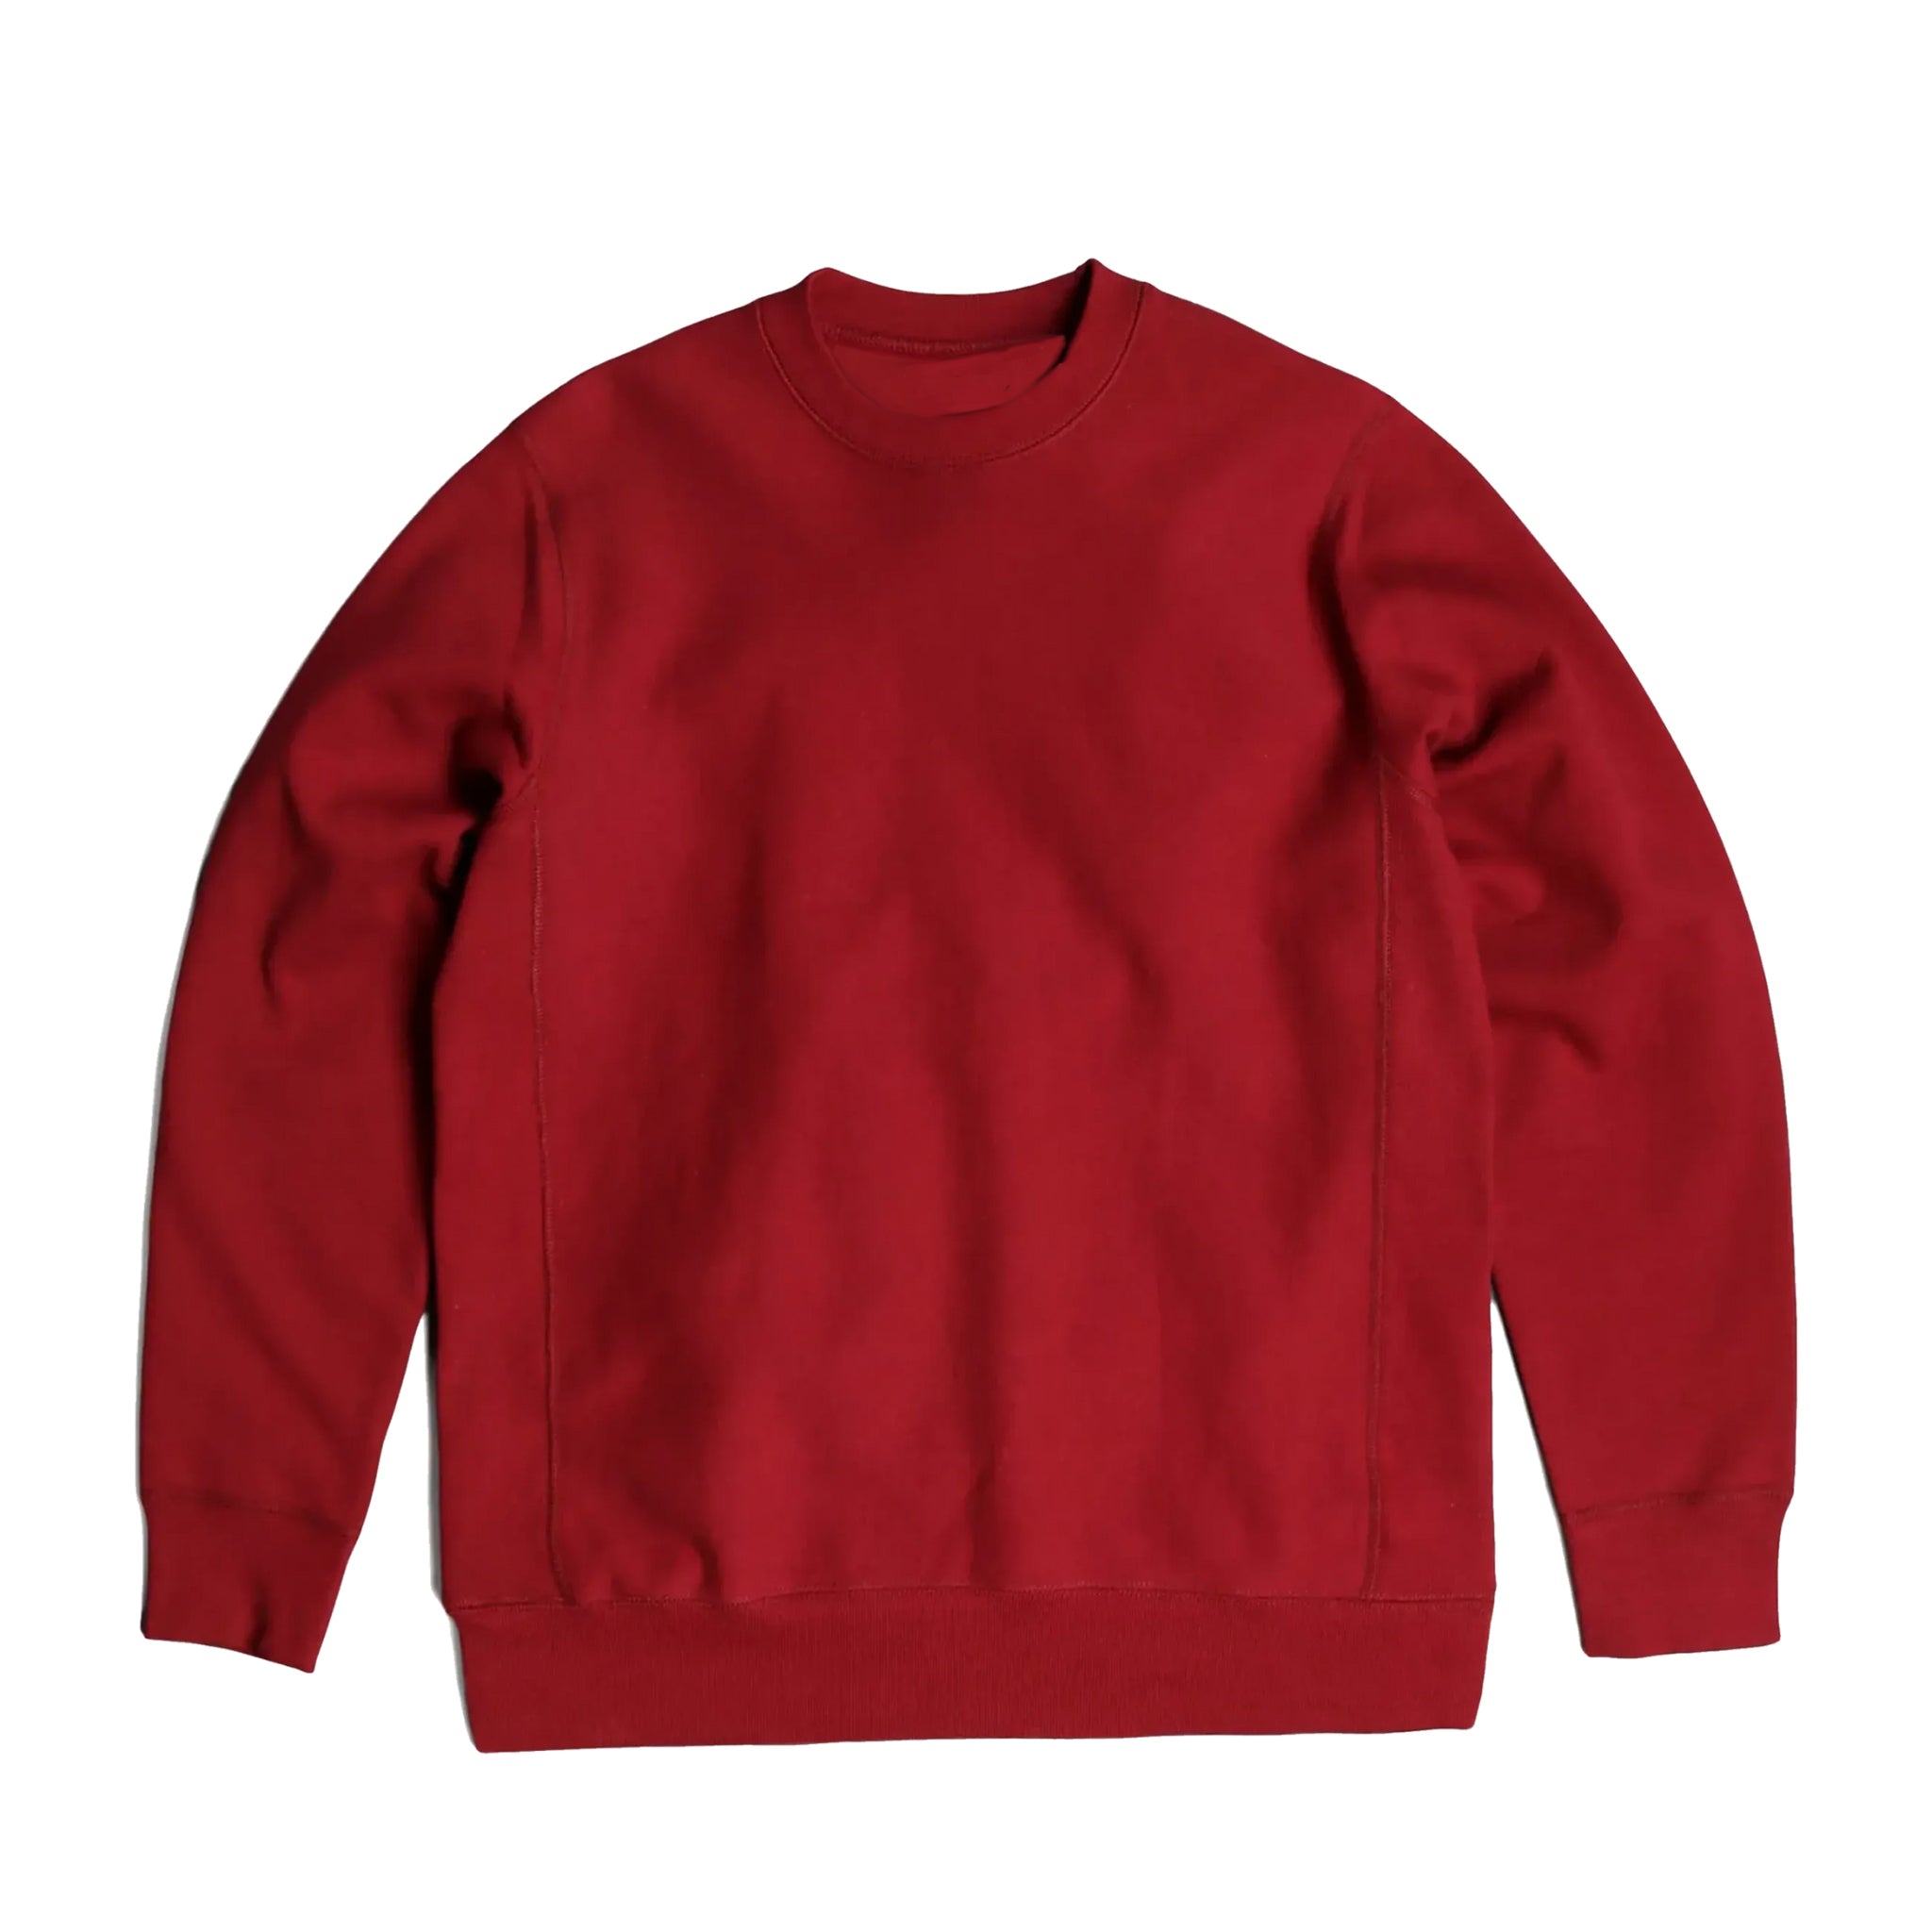 Front view of red heavyweight knit crewneck in 100% cotton